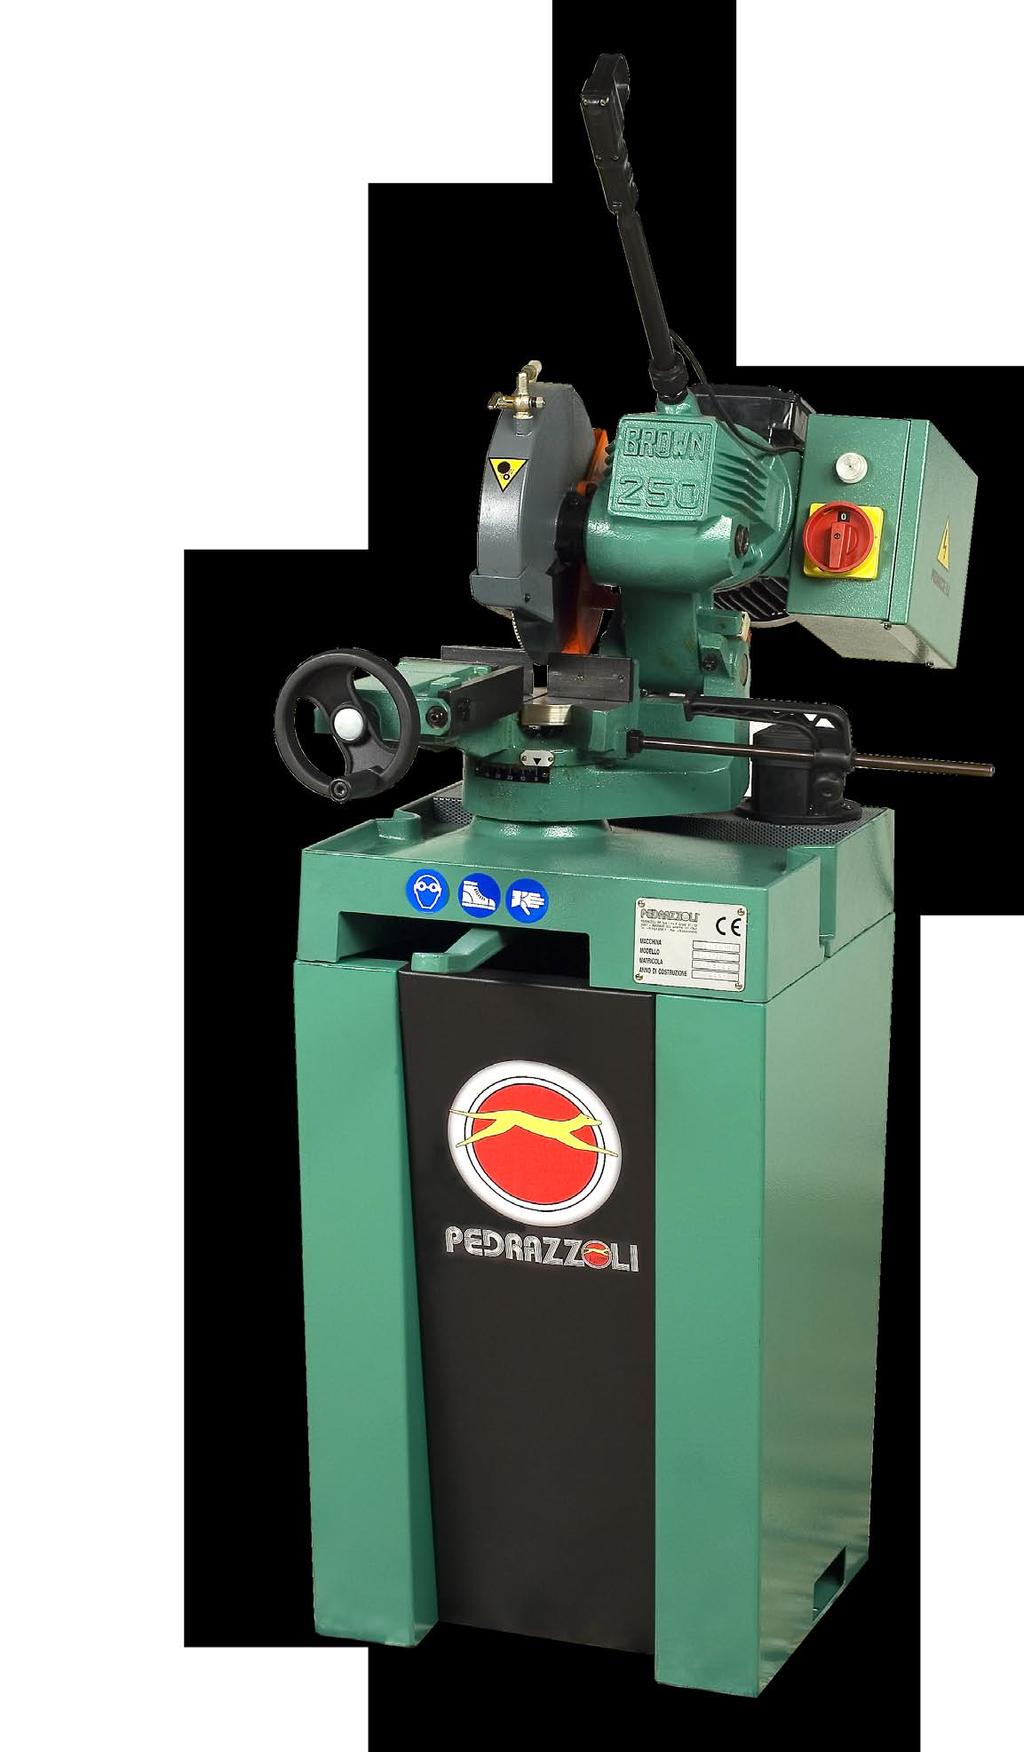 BROWN 250 MANUAL CIRCULAR SAW quality and durability sturdy and compact DOUBLE BALL BEARING SUPPORT OF BLADE DRIVE.